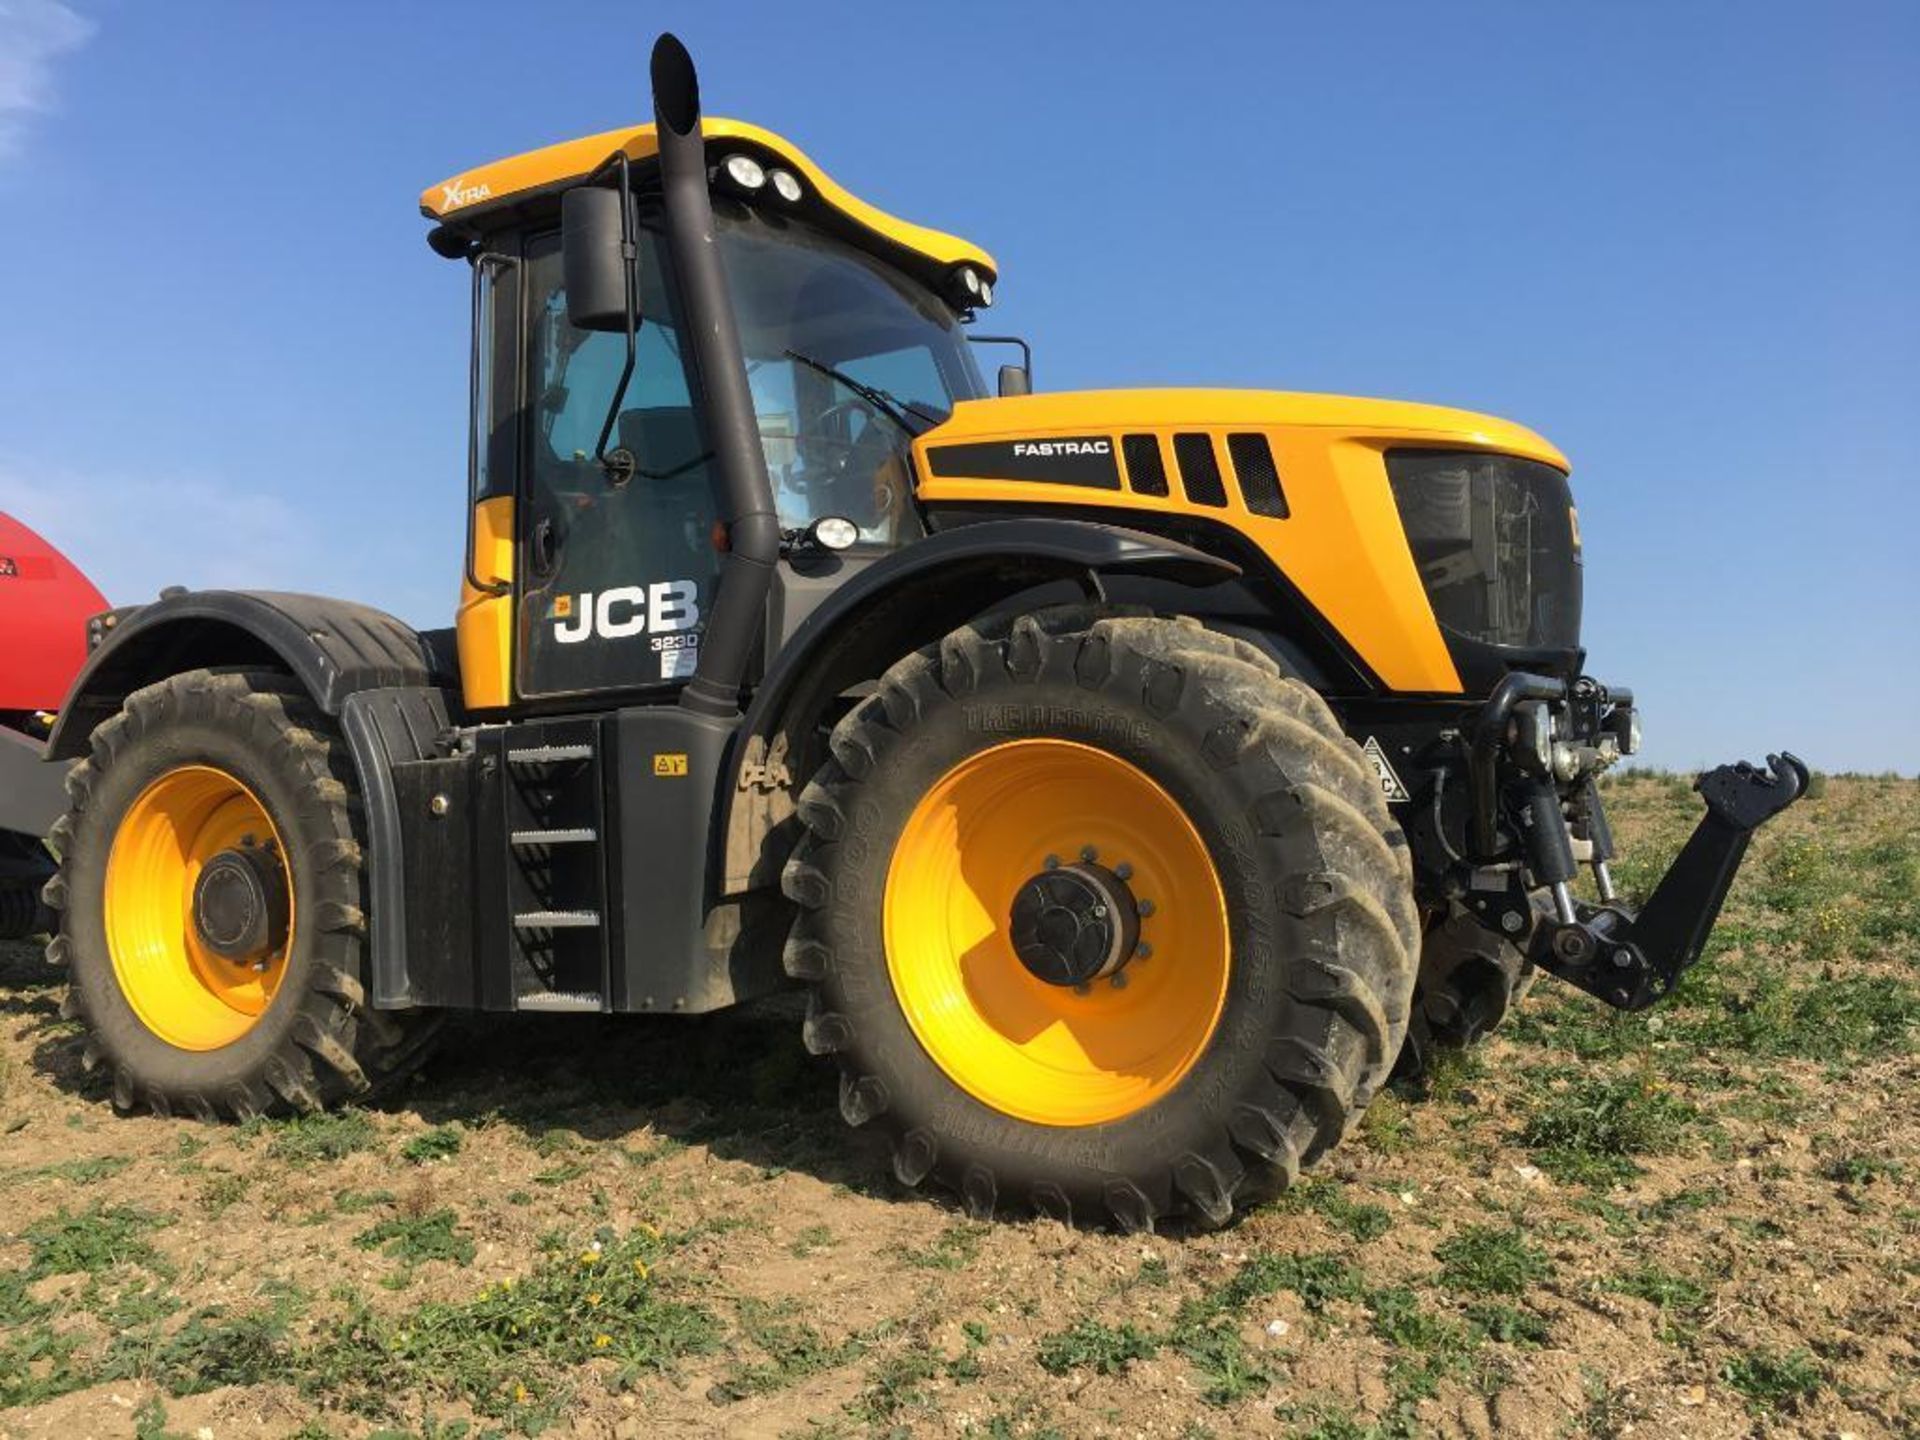 2017 JCB Fastrac 3230 Xtra 65Kph 4WD tractor with Zuidberg front linkage, 4 electric spool valves, a - Image 12 of 24